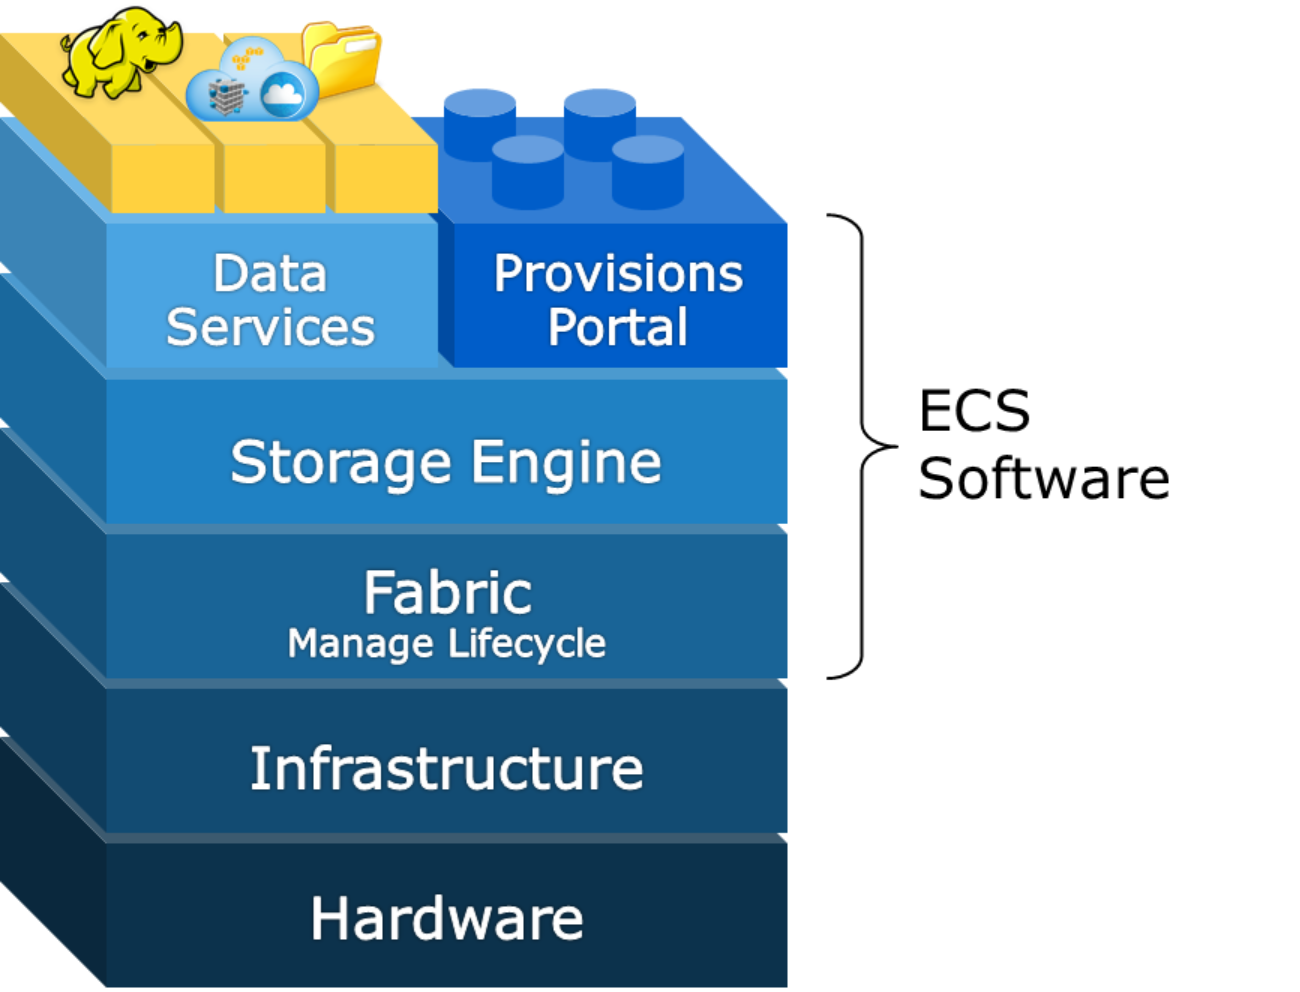 Hardware layer is on the bottom with Infrastructure layer on top of it.  ECS software on top of Infrastructure layer with Fabric, Storage Engine, Data Services and the Provisioning Portal layers up from it.